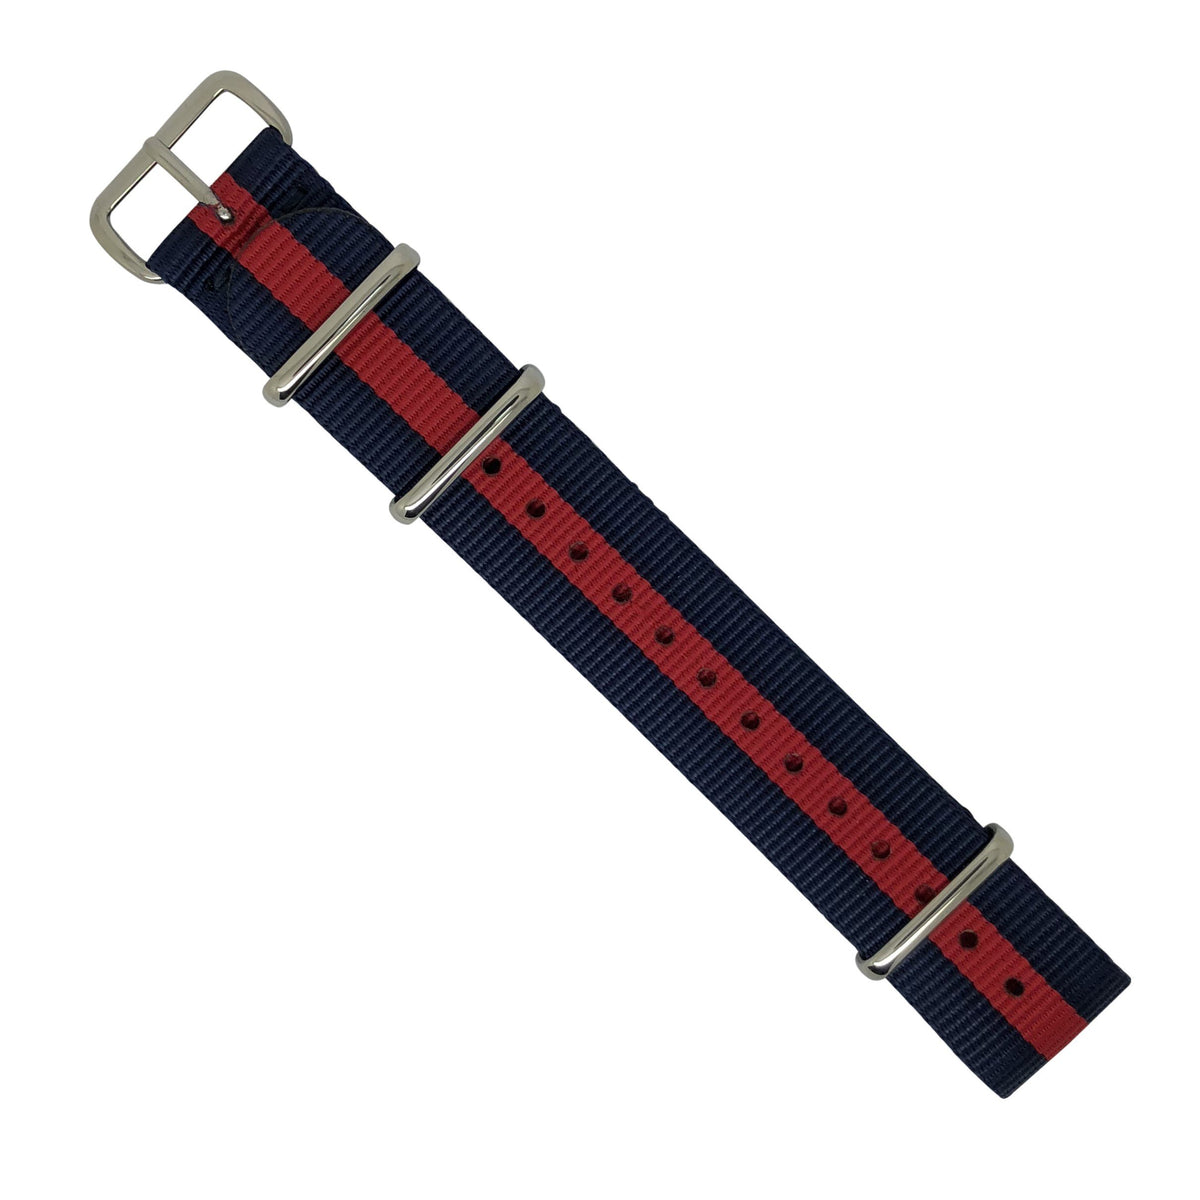 Premium Nato Strap in Navy Red with Polished Silver Buckle (20mm) - Nomadstore Singapore